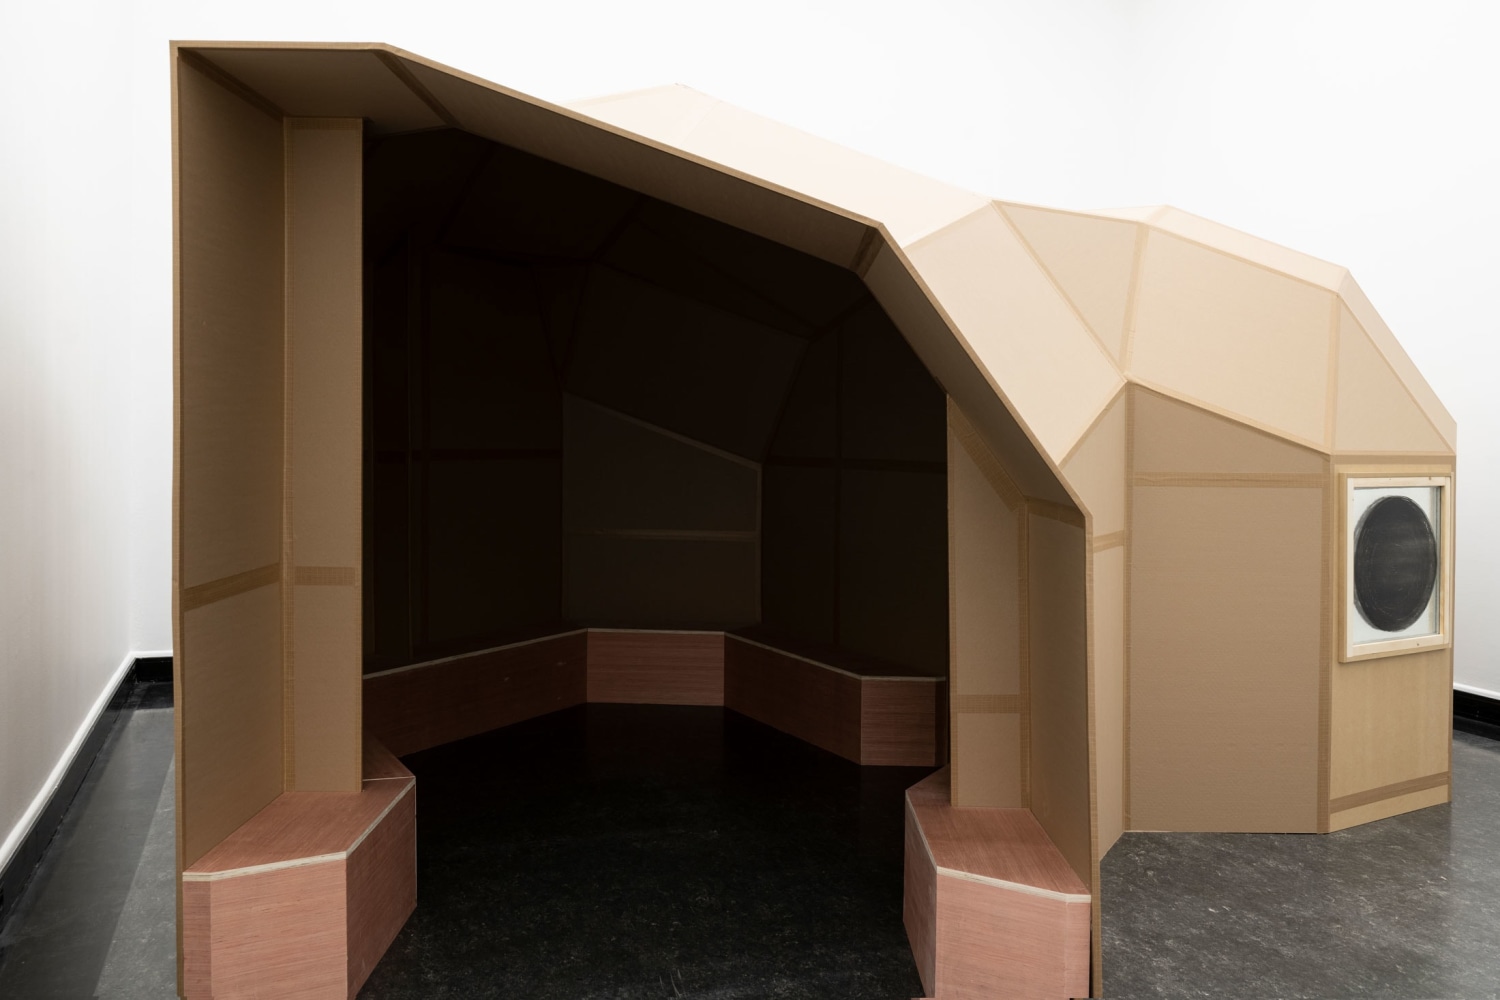 Oscar Tuazon
White Earth Water School, 2023
One of four parts, variable dimensions Cardboard, wood, tape
Installation view of Water School&amp;nbsp;at Bergen Kunsthall, Norway
January 27 &amp;ndash; April 9, 2023
Photo: Thor Br&amp;oslash;dreskift, Courtesy of the artist and Galerie Chantal Crousel, Paris